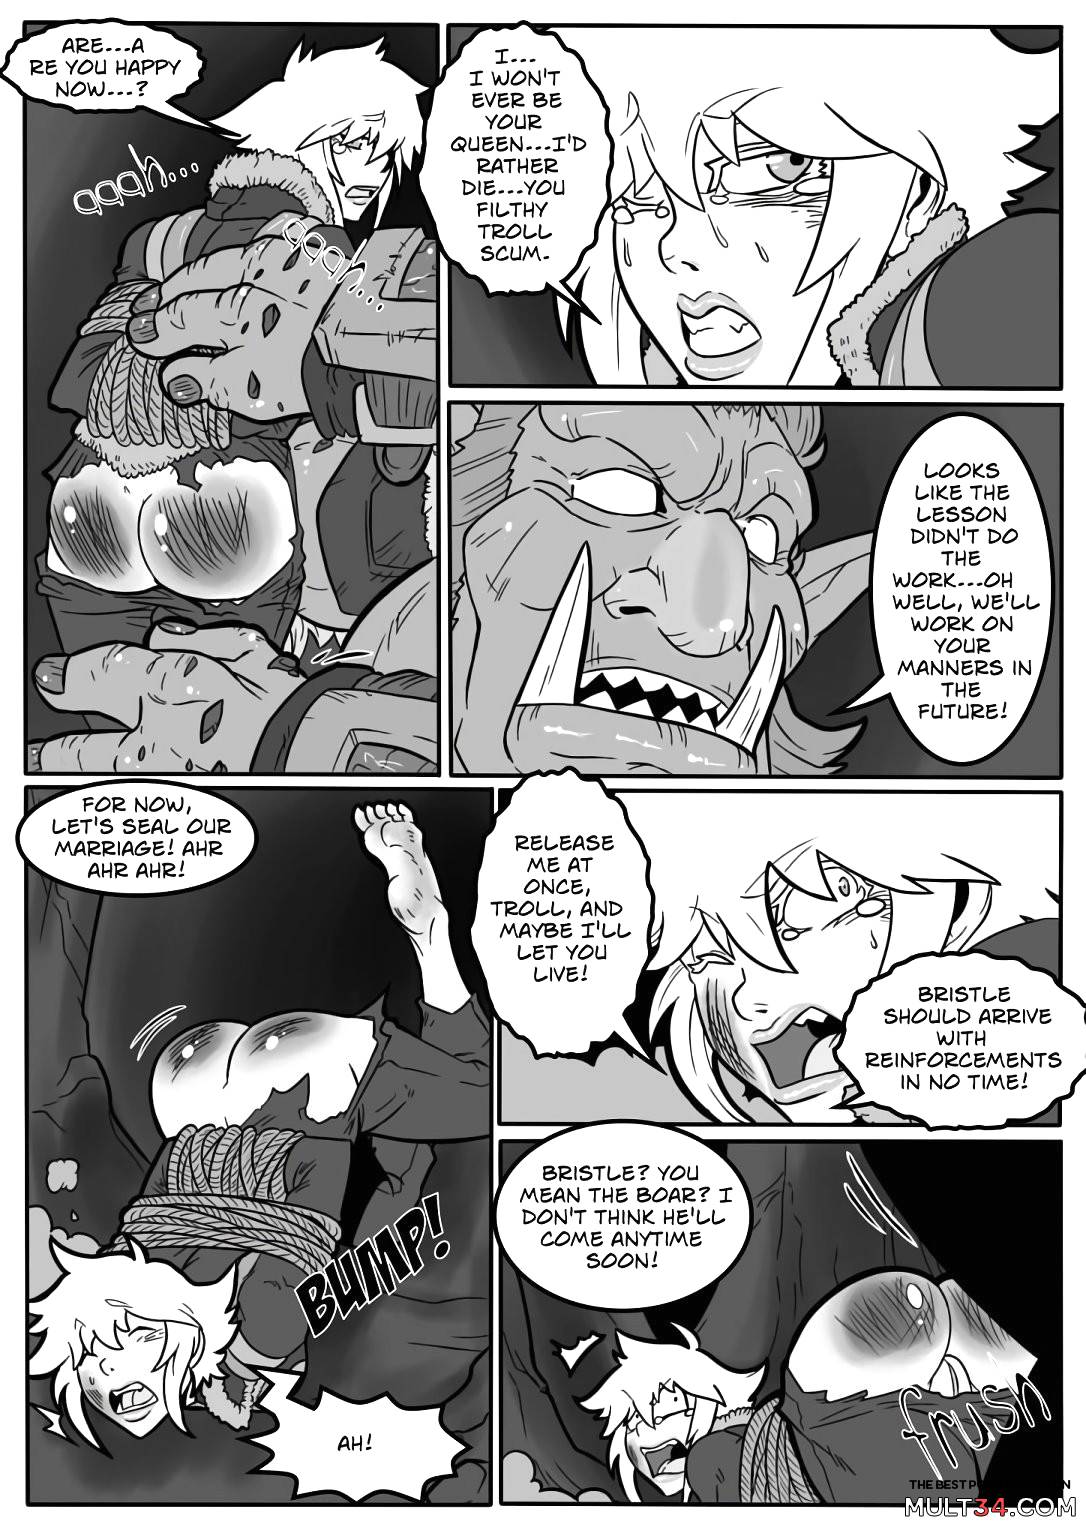 Tales of the Troll King 2 page 9